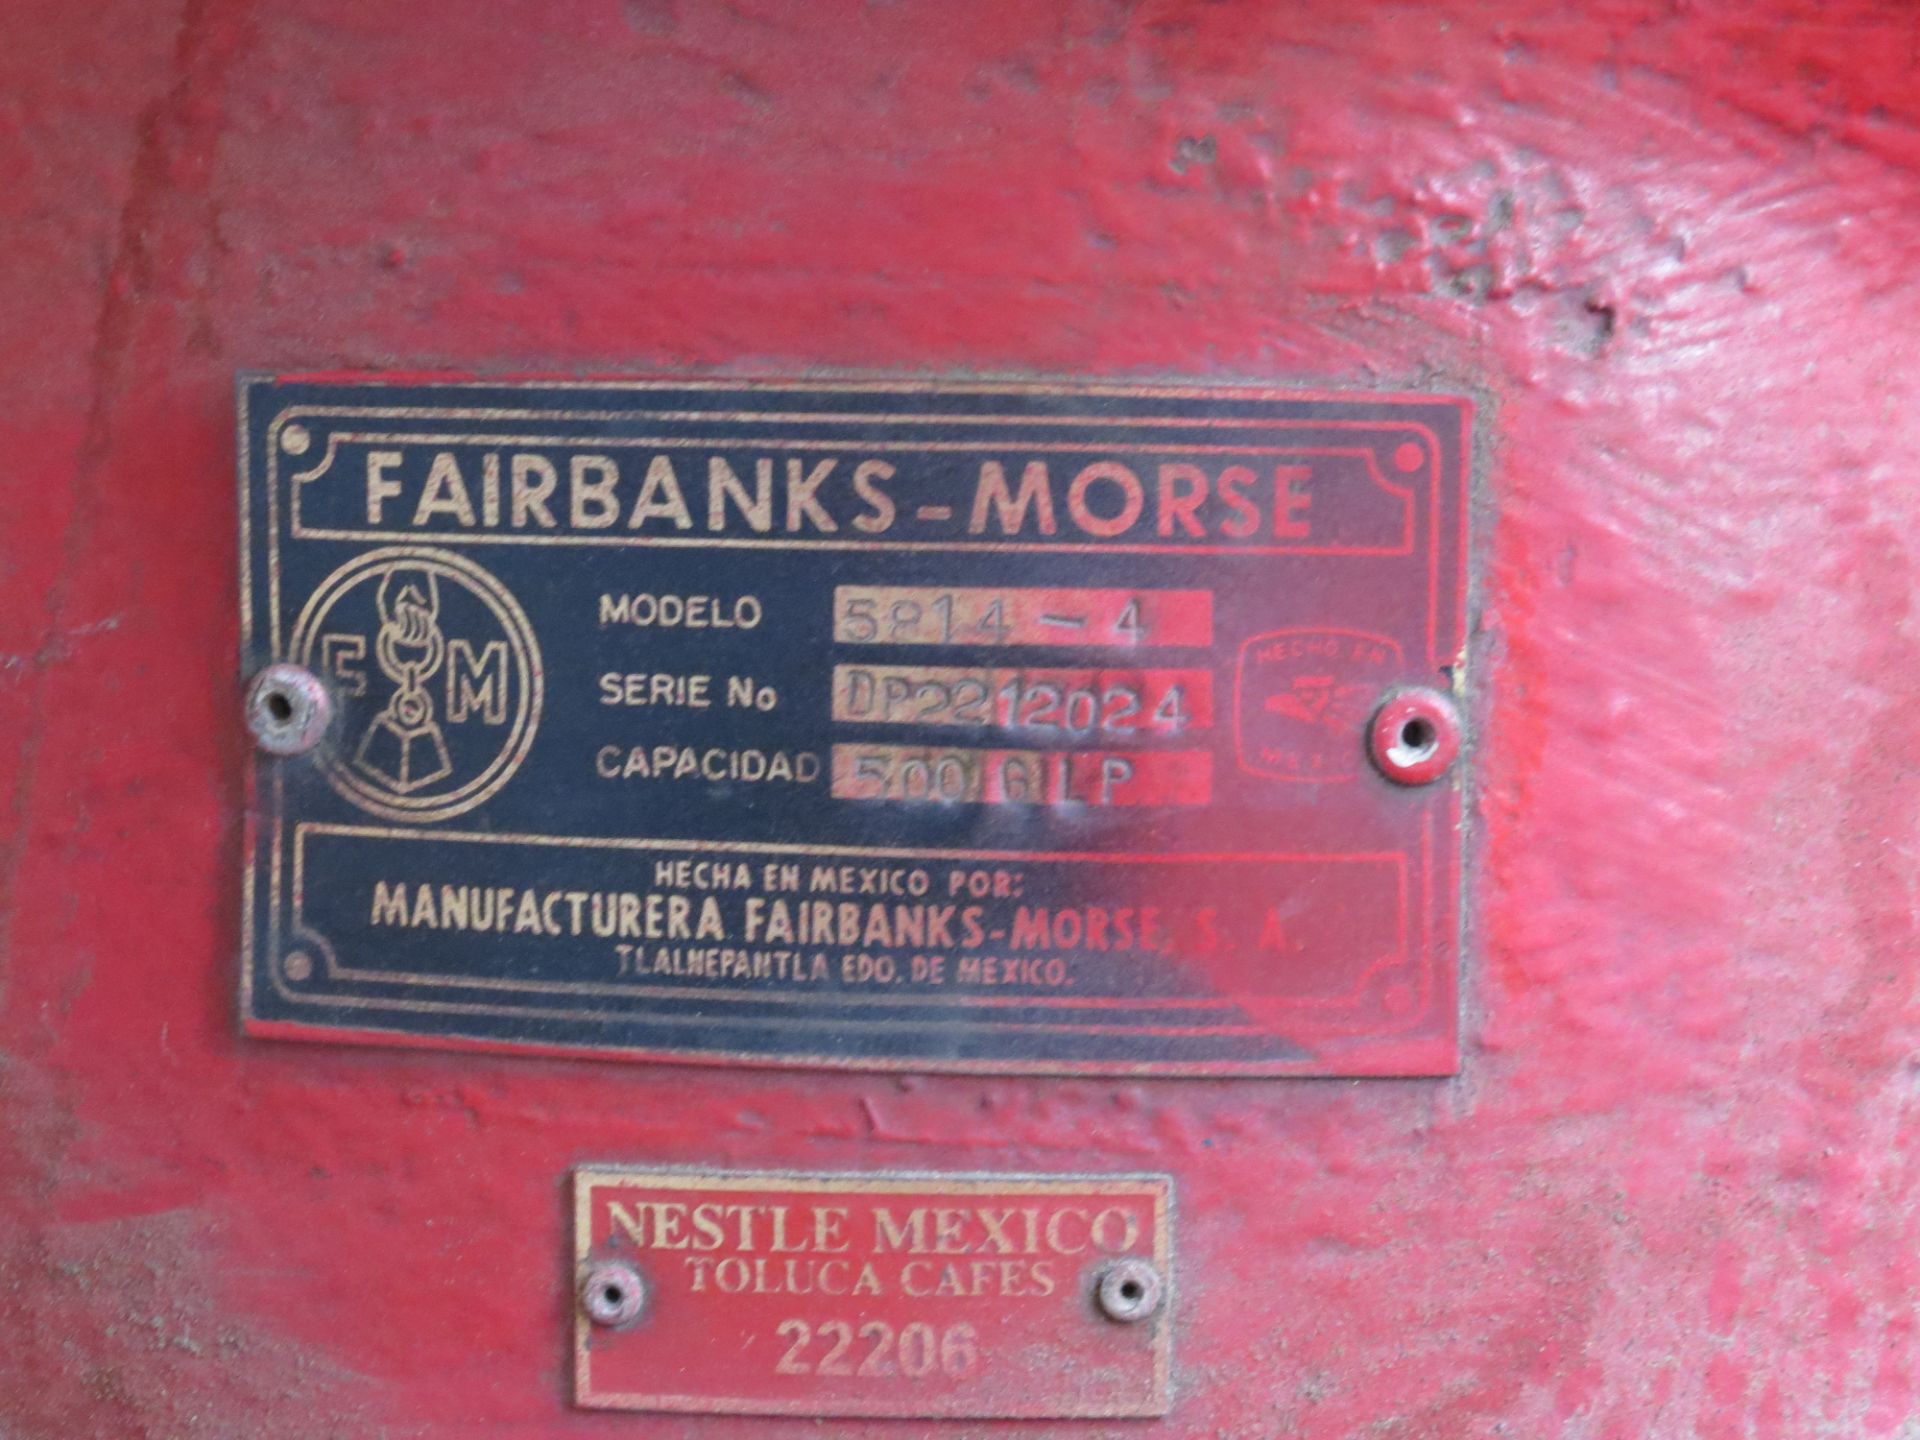 Fire Suppression System, includes Fairbanks Morse pump, model 5814-4 - Image 16 of 17